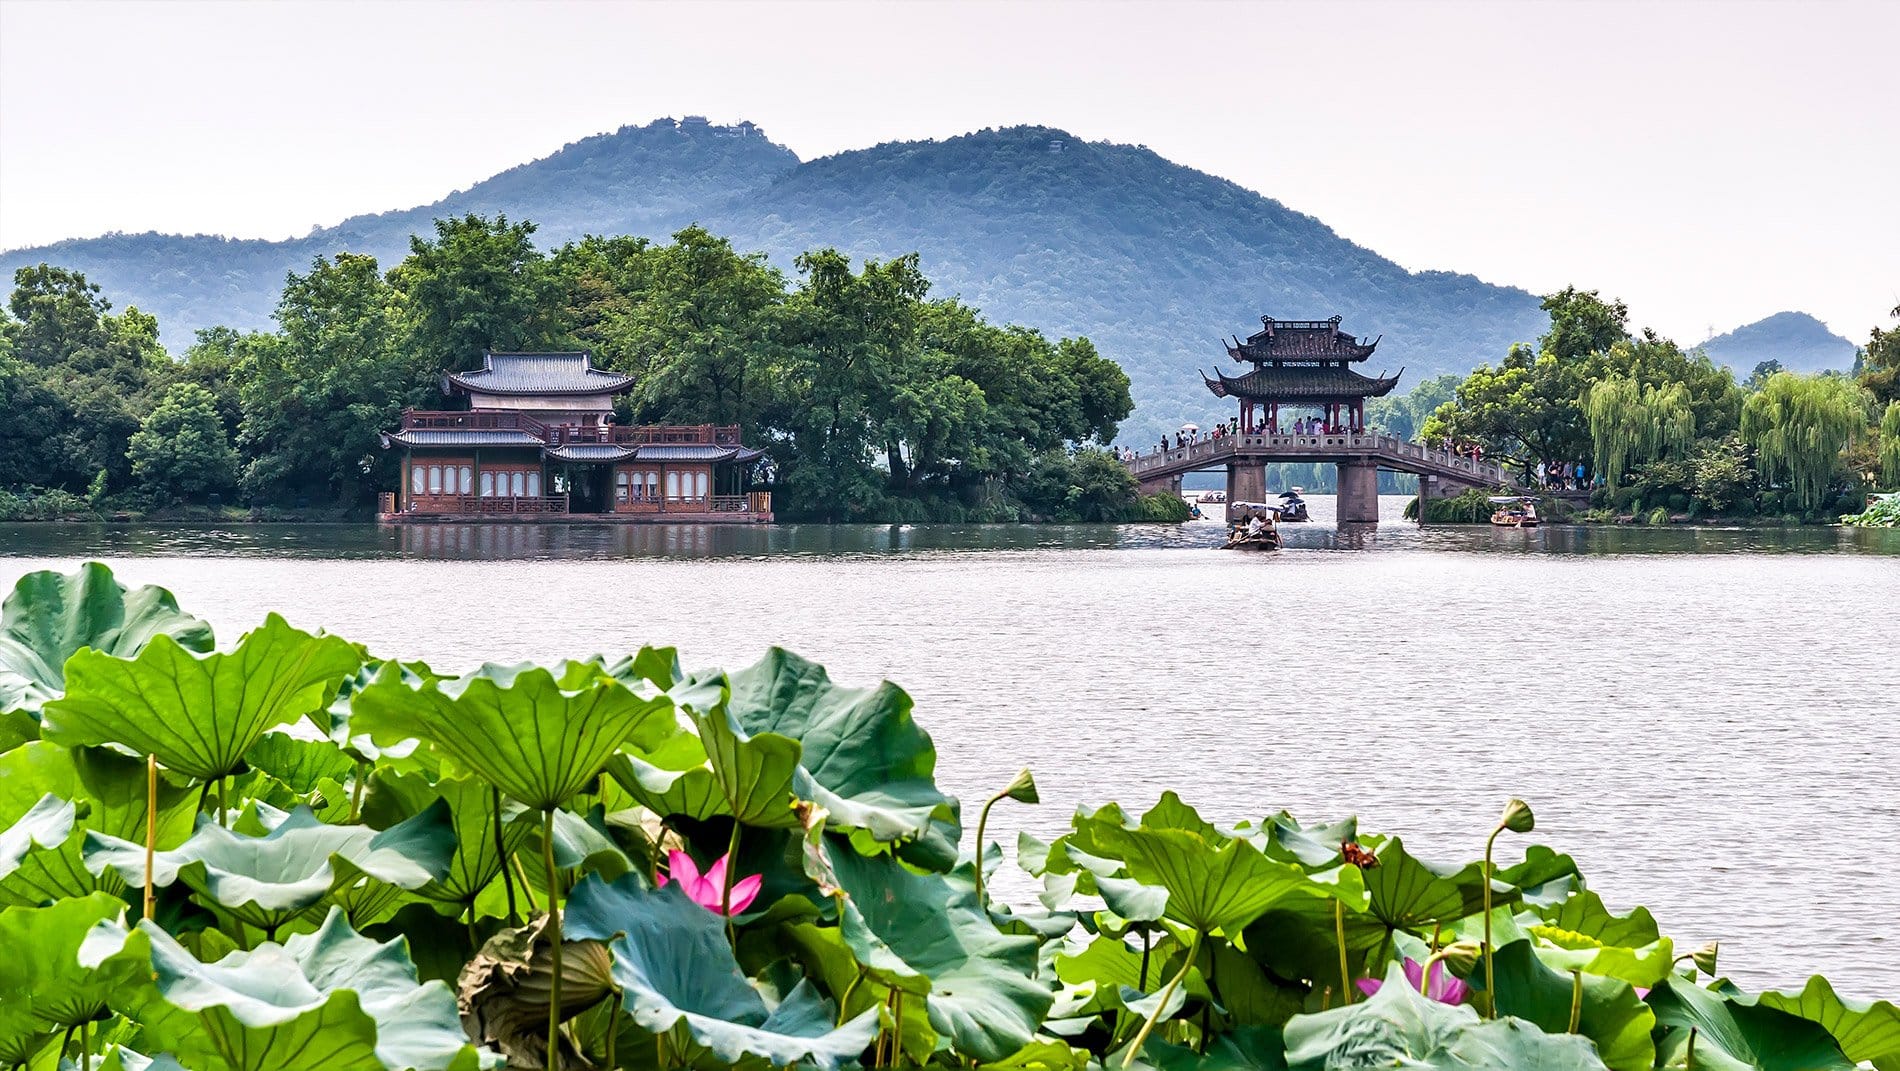 West Lake~West Lake has defined scenic elegance in East Asia for many centuries. Visitors will see its lakeside willow trees, ornamental bridges and causeways as a quintessentially Chinese idiom.